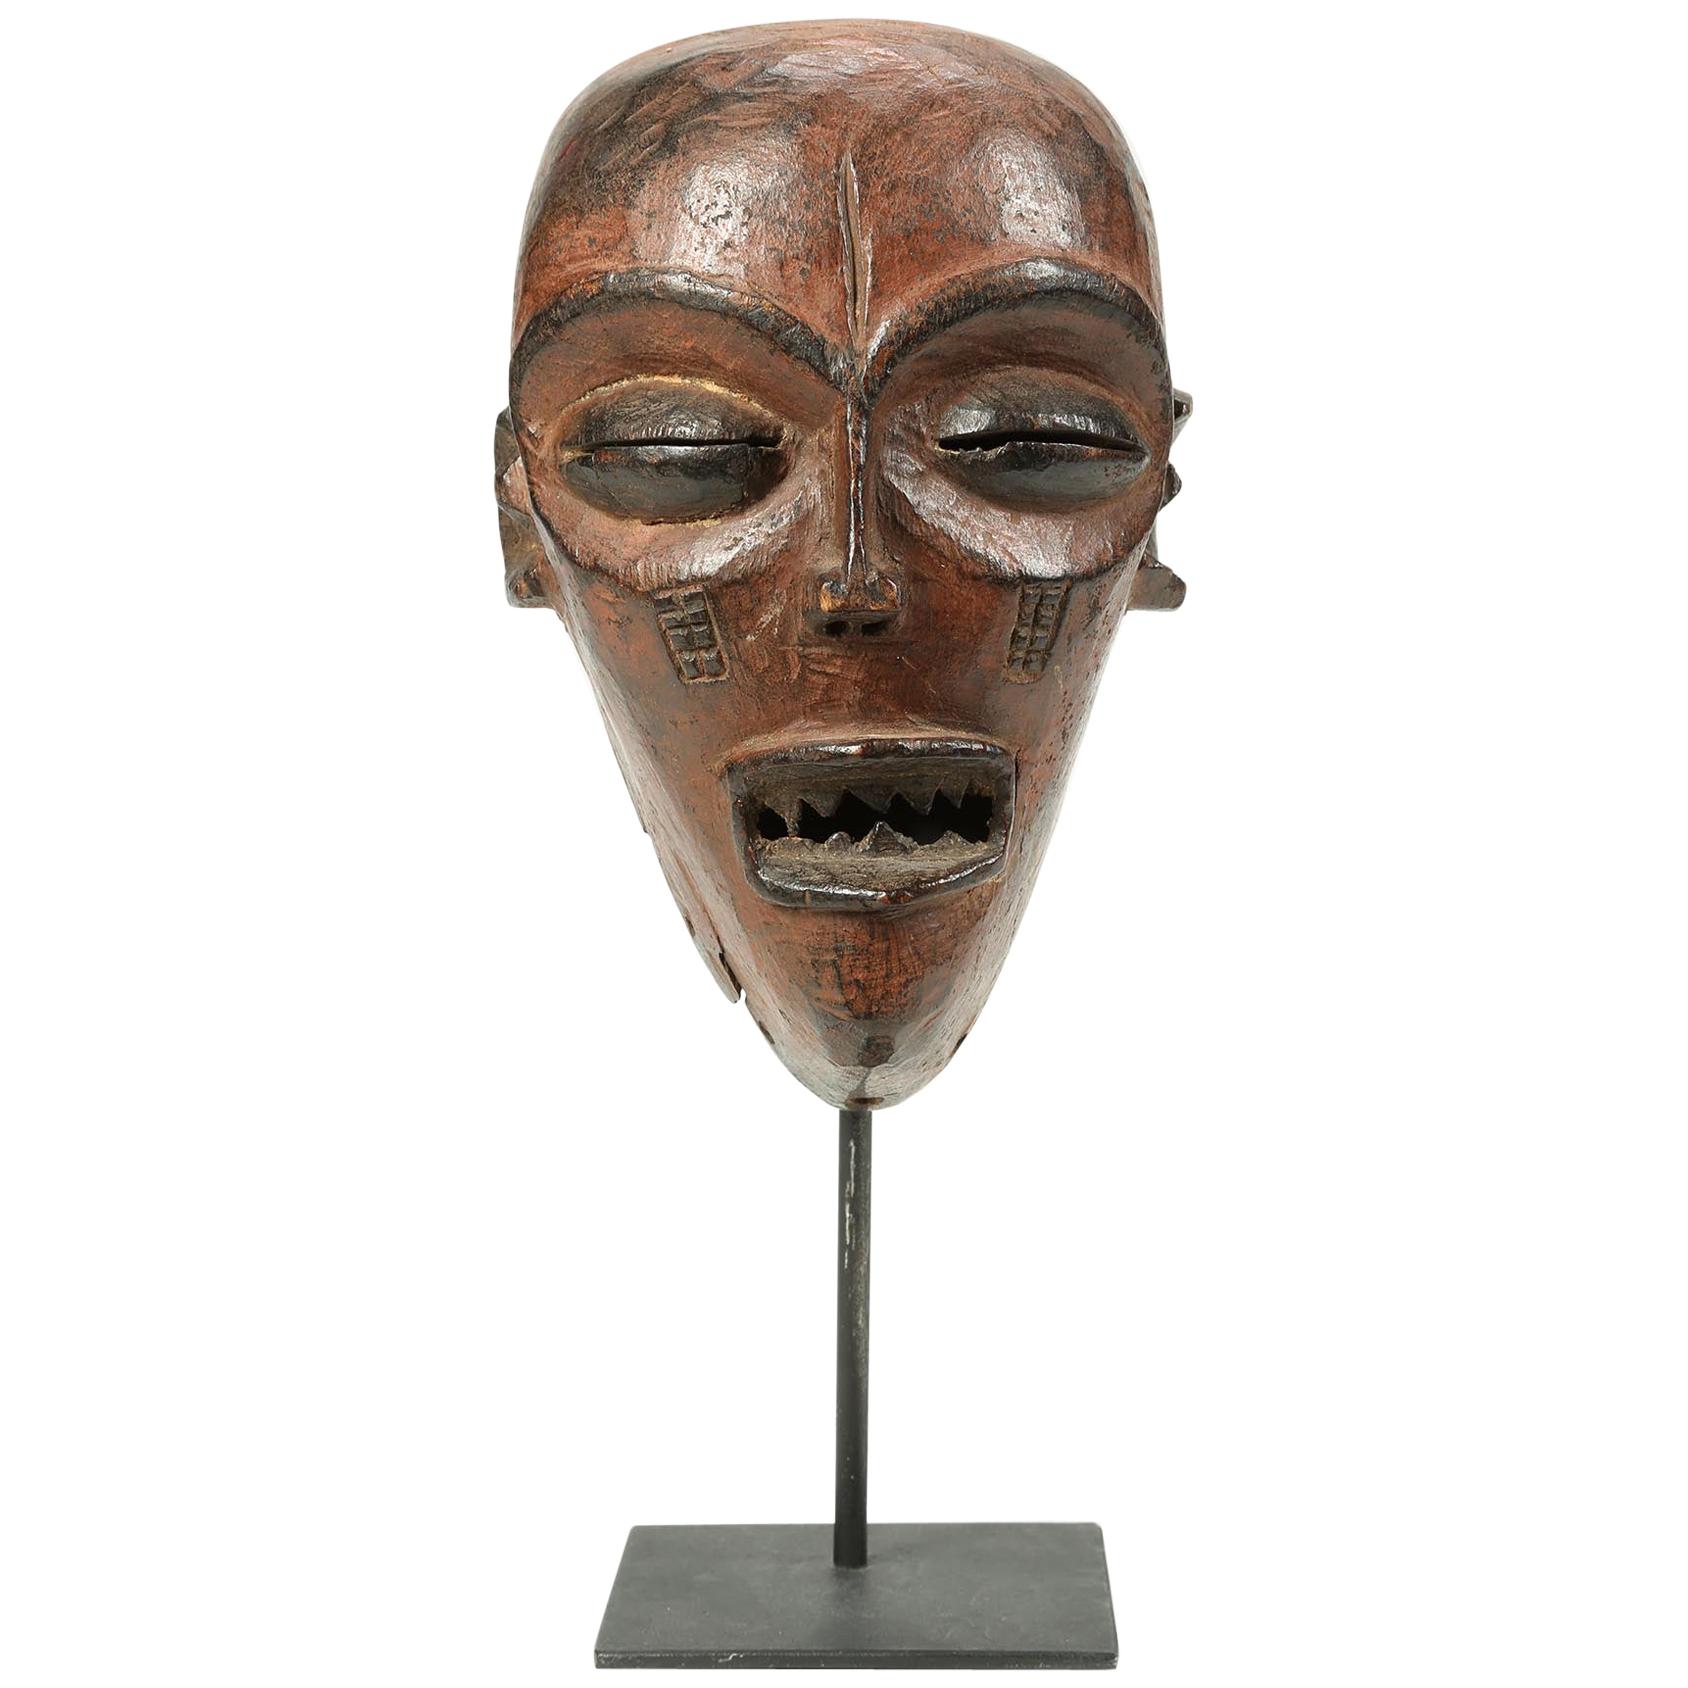 Early 20th century Chokwe wood mask with strong facial features on custom metal base, Angola or Congo, Africa. Traces of red pigment with black accents. Mask 8